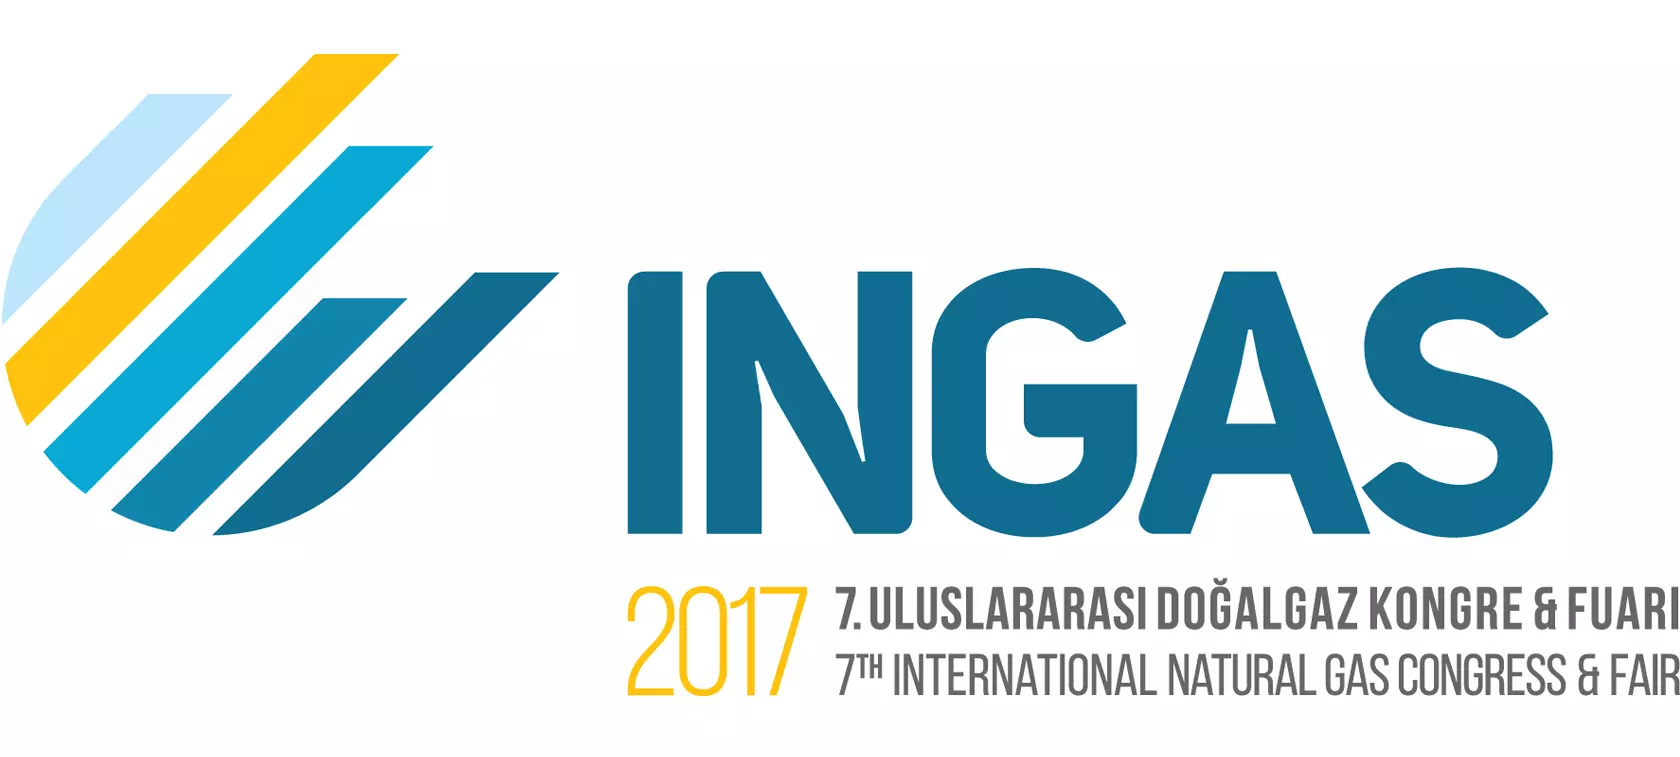 INGAS 2017 - pulse of natural gas